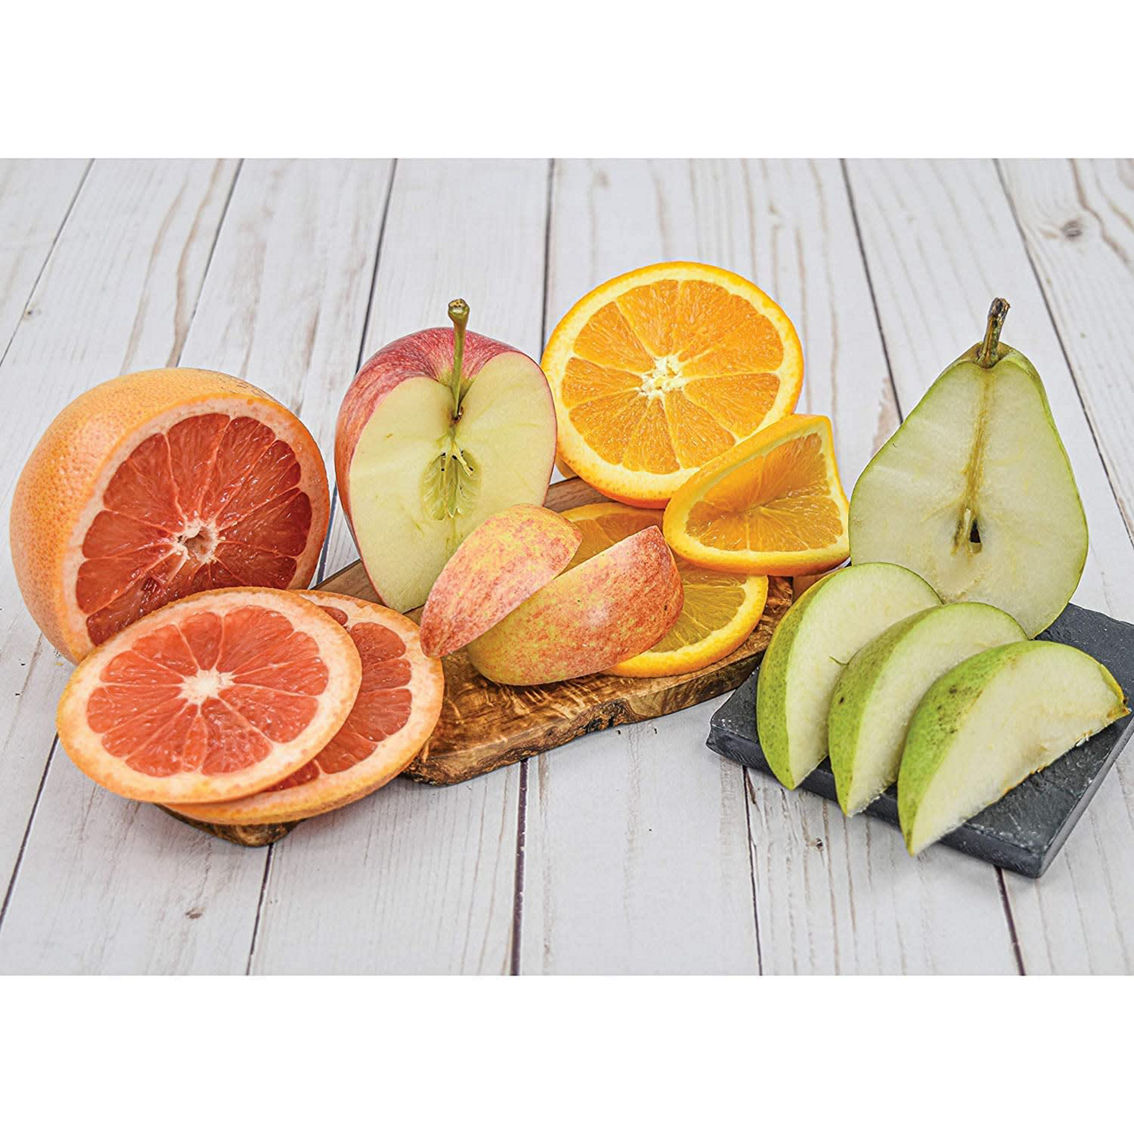 Fresh Fruit Variety Gift Pack (10lbs) - Image 2 of 5